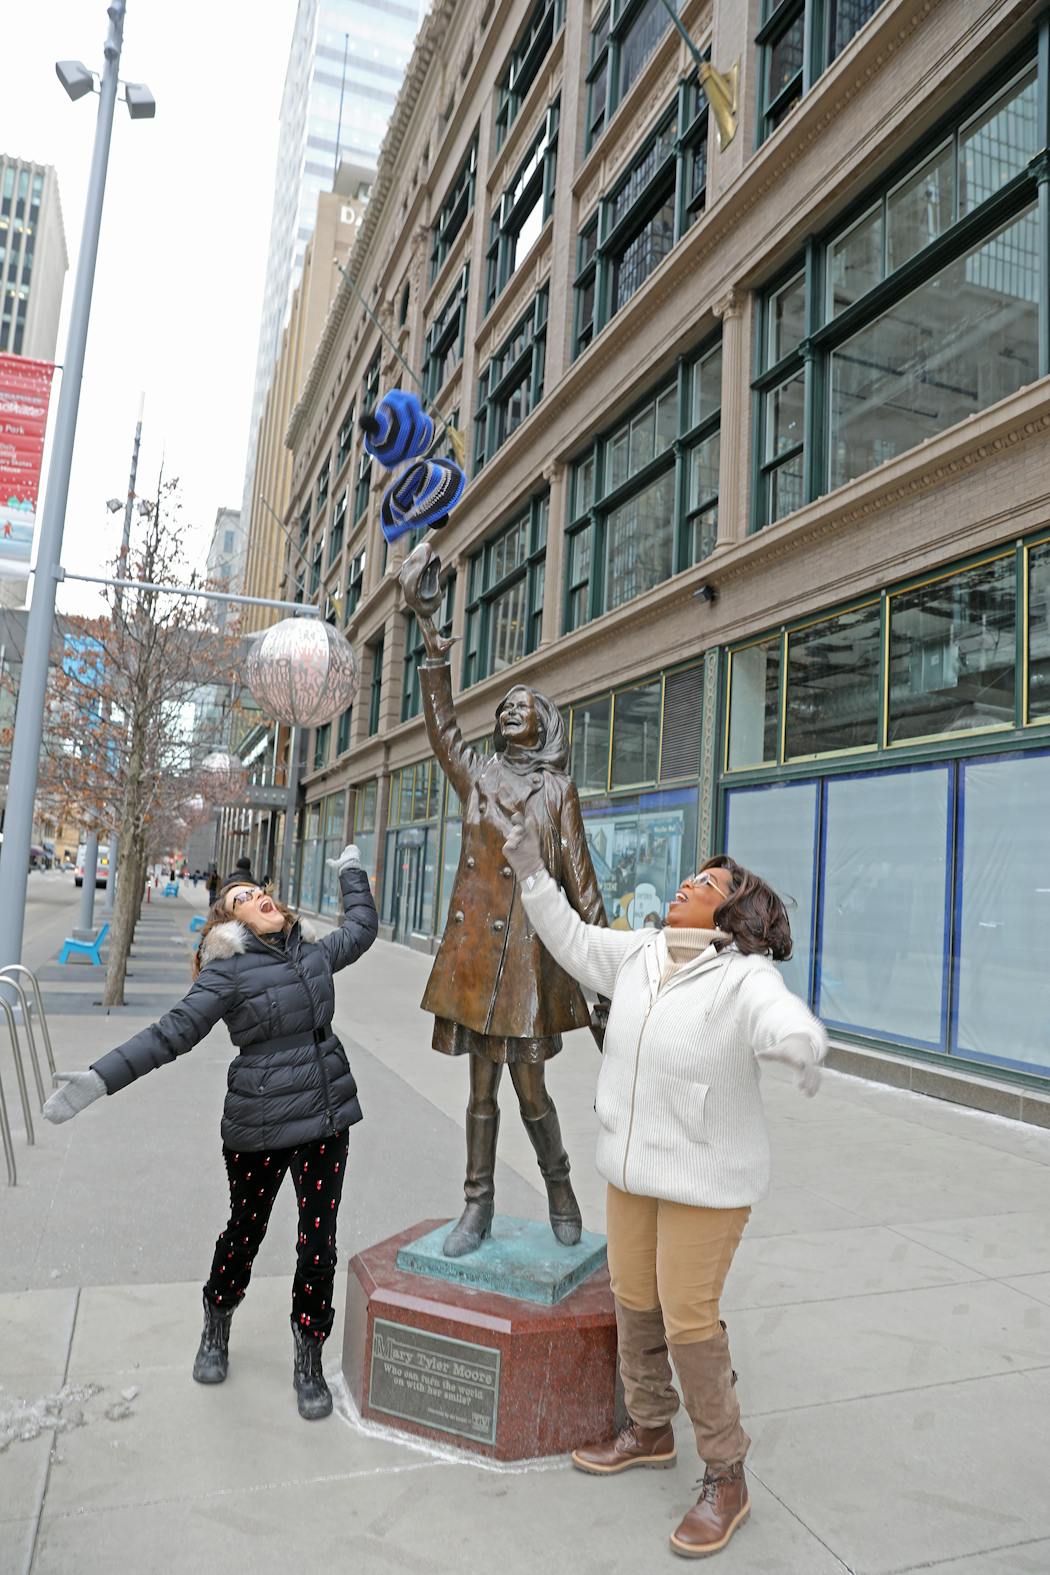 Oprah Winfrey and Tina Fey at the Mary Tyler Moore statue in downtown Minneapolis on Friday.